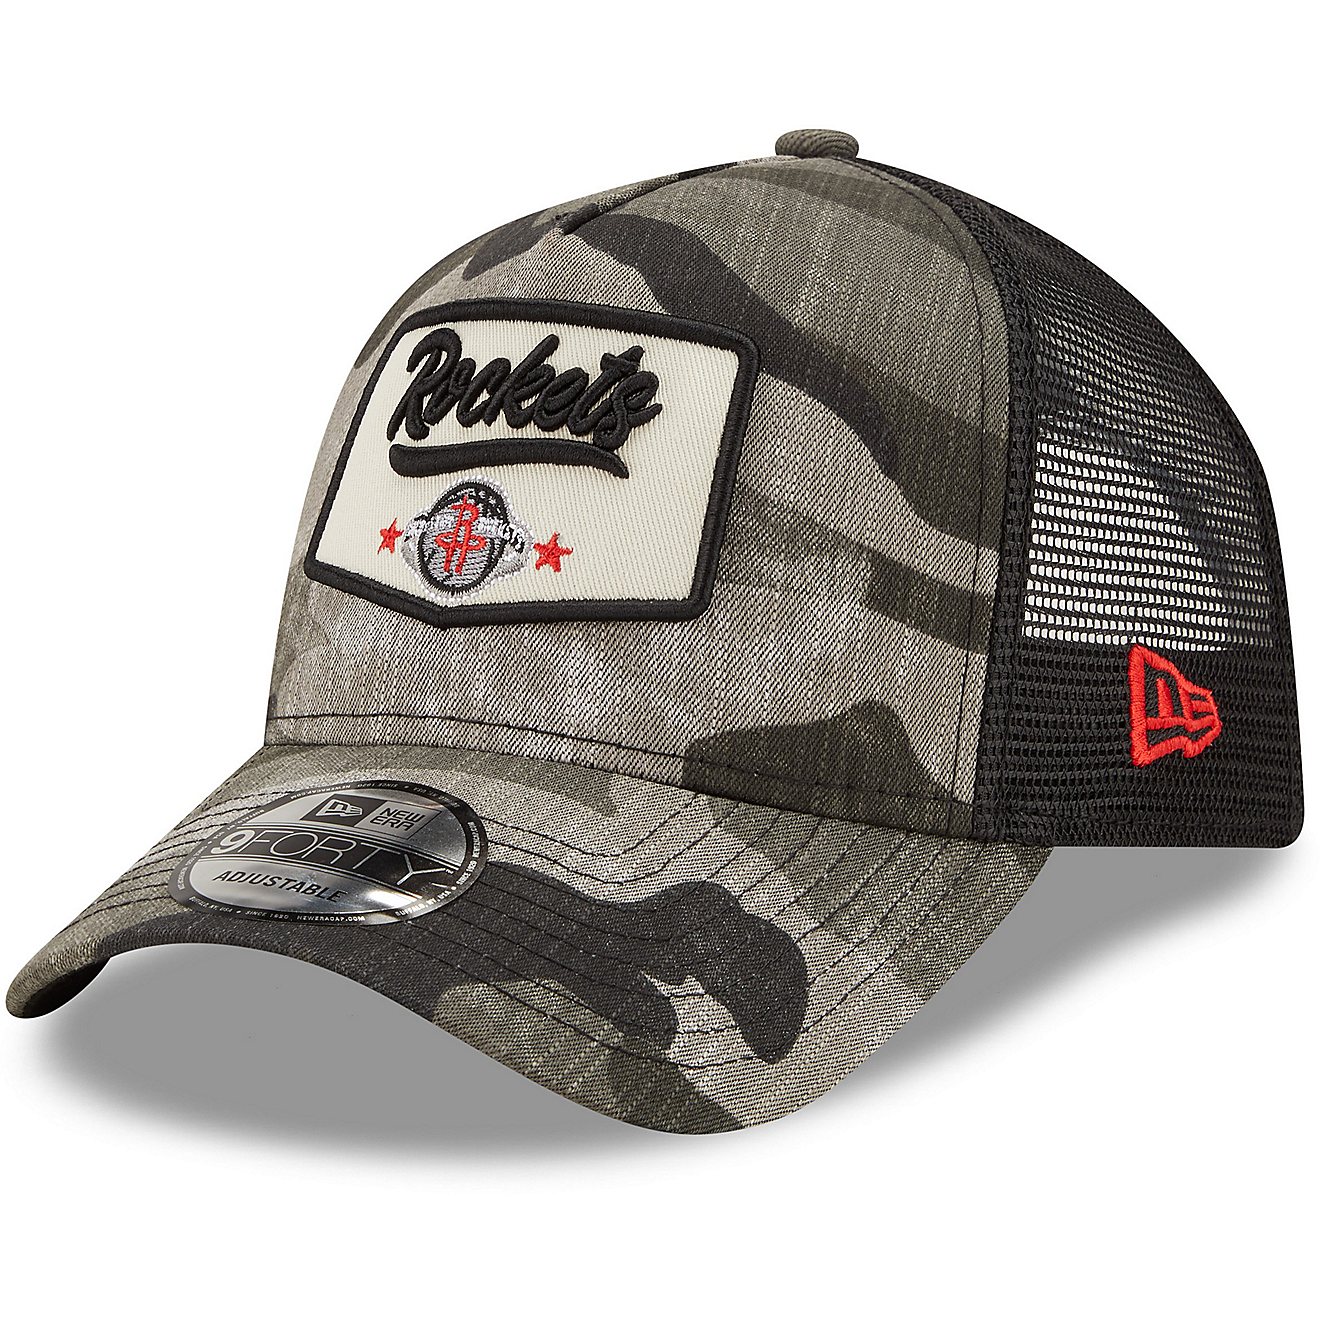 New Era Men's Houston Rockets Camo Patch 9FORTY Cap                                                                              - view number 1